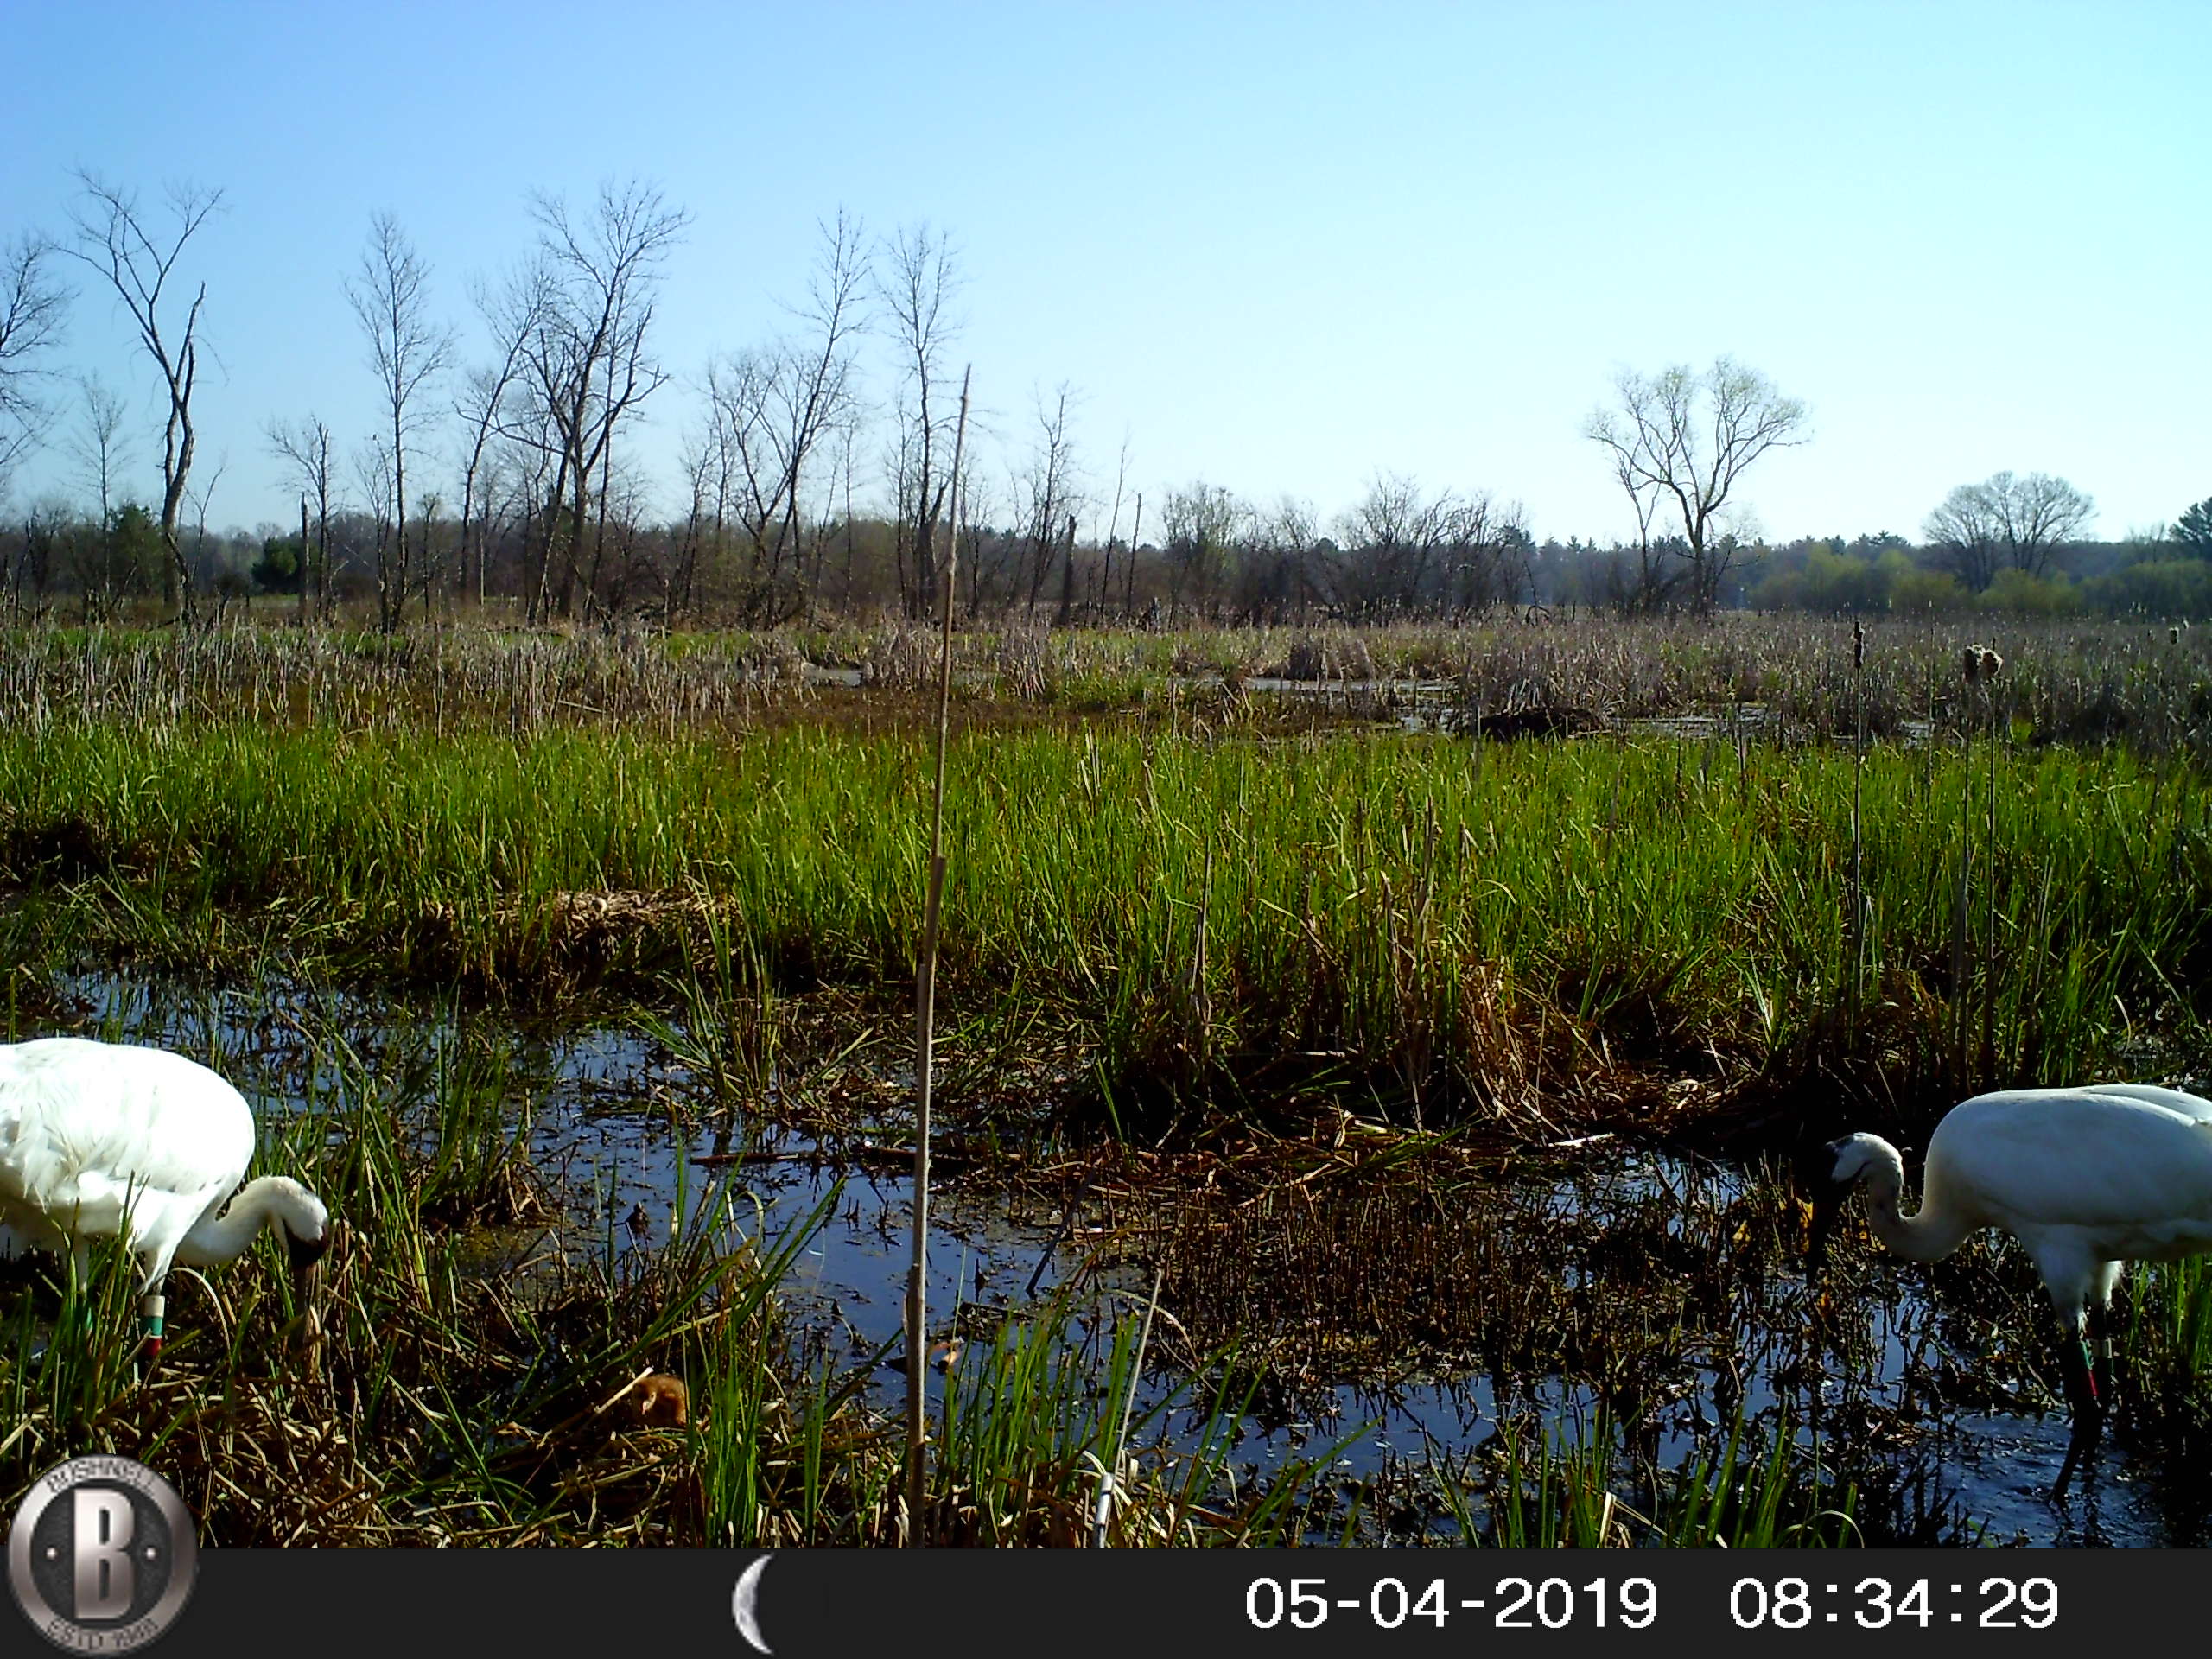 Camera trap photo of two adult Whooping Cranes and their chick